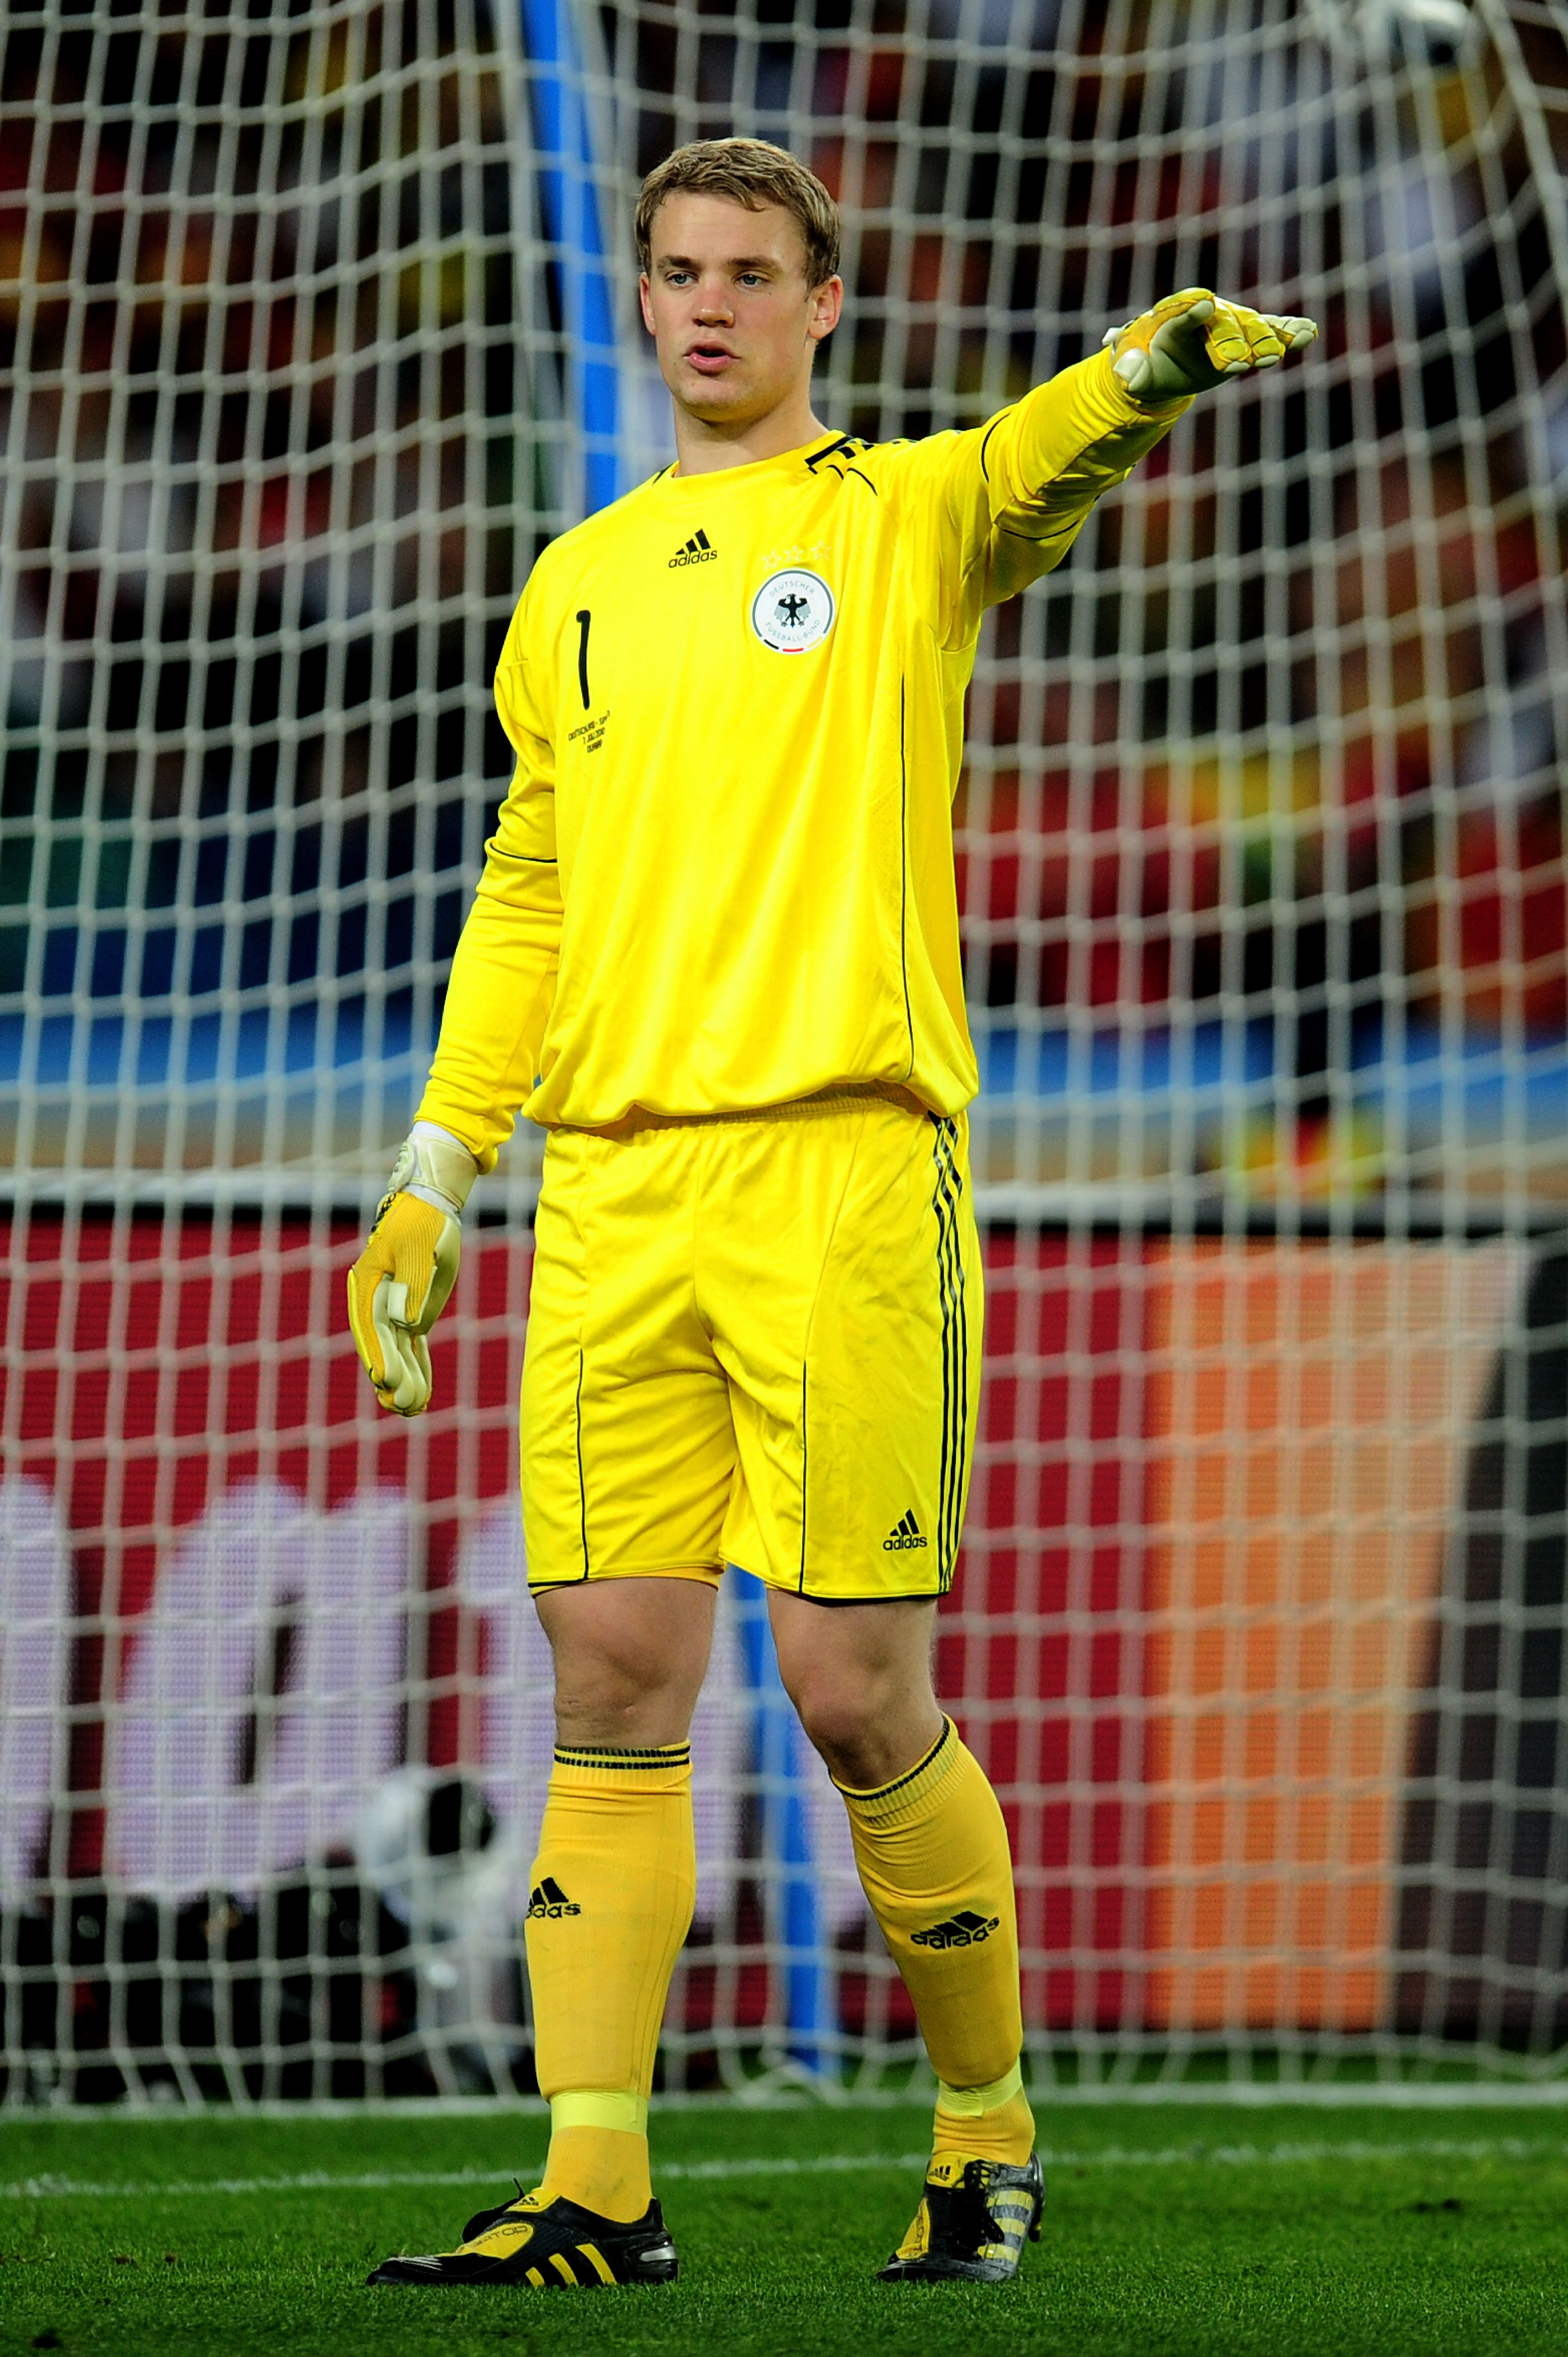 DURBAN, SOUTH AFRICA - JULY 07:  Manuel Neuer of Germany directs his defence during the 2010 FIFA World Cup South Africa Semi Final match between Germany and Spain at Durban Stadium on July 7, 2010 in Durban, South Africa.  (Photo by Clive Mason/Getty Ima